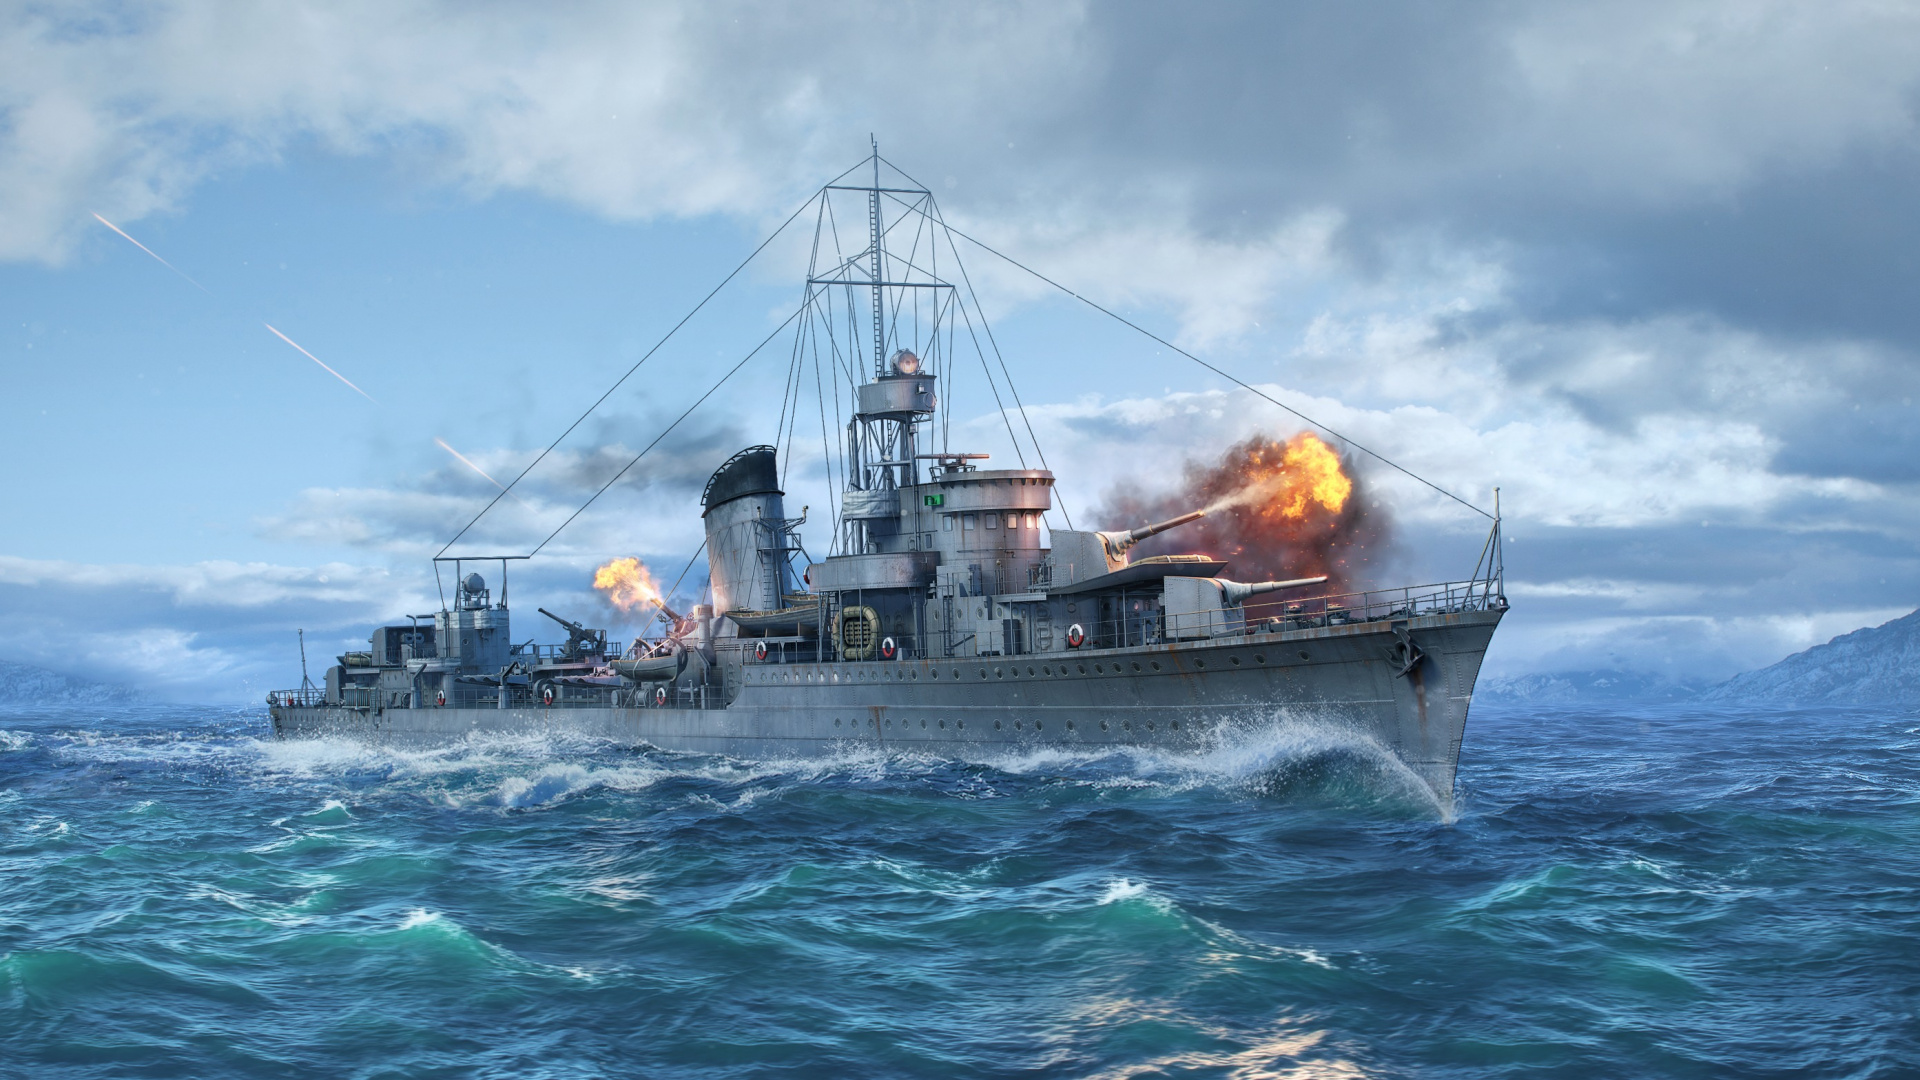 World of Warships, Destroyer, Warship, Naval Ship, Boat. Wallpaper in 1920x1080 Resolution